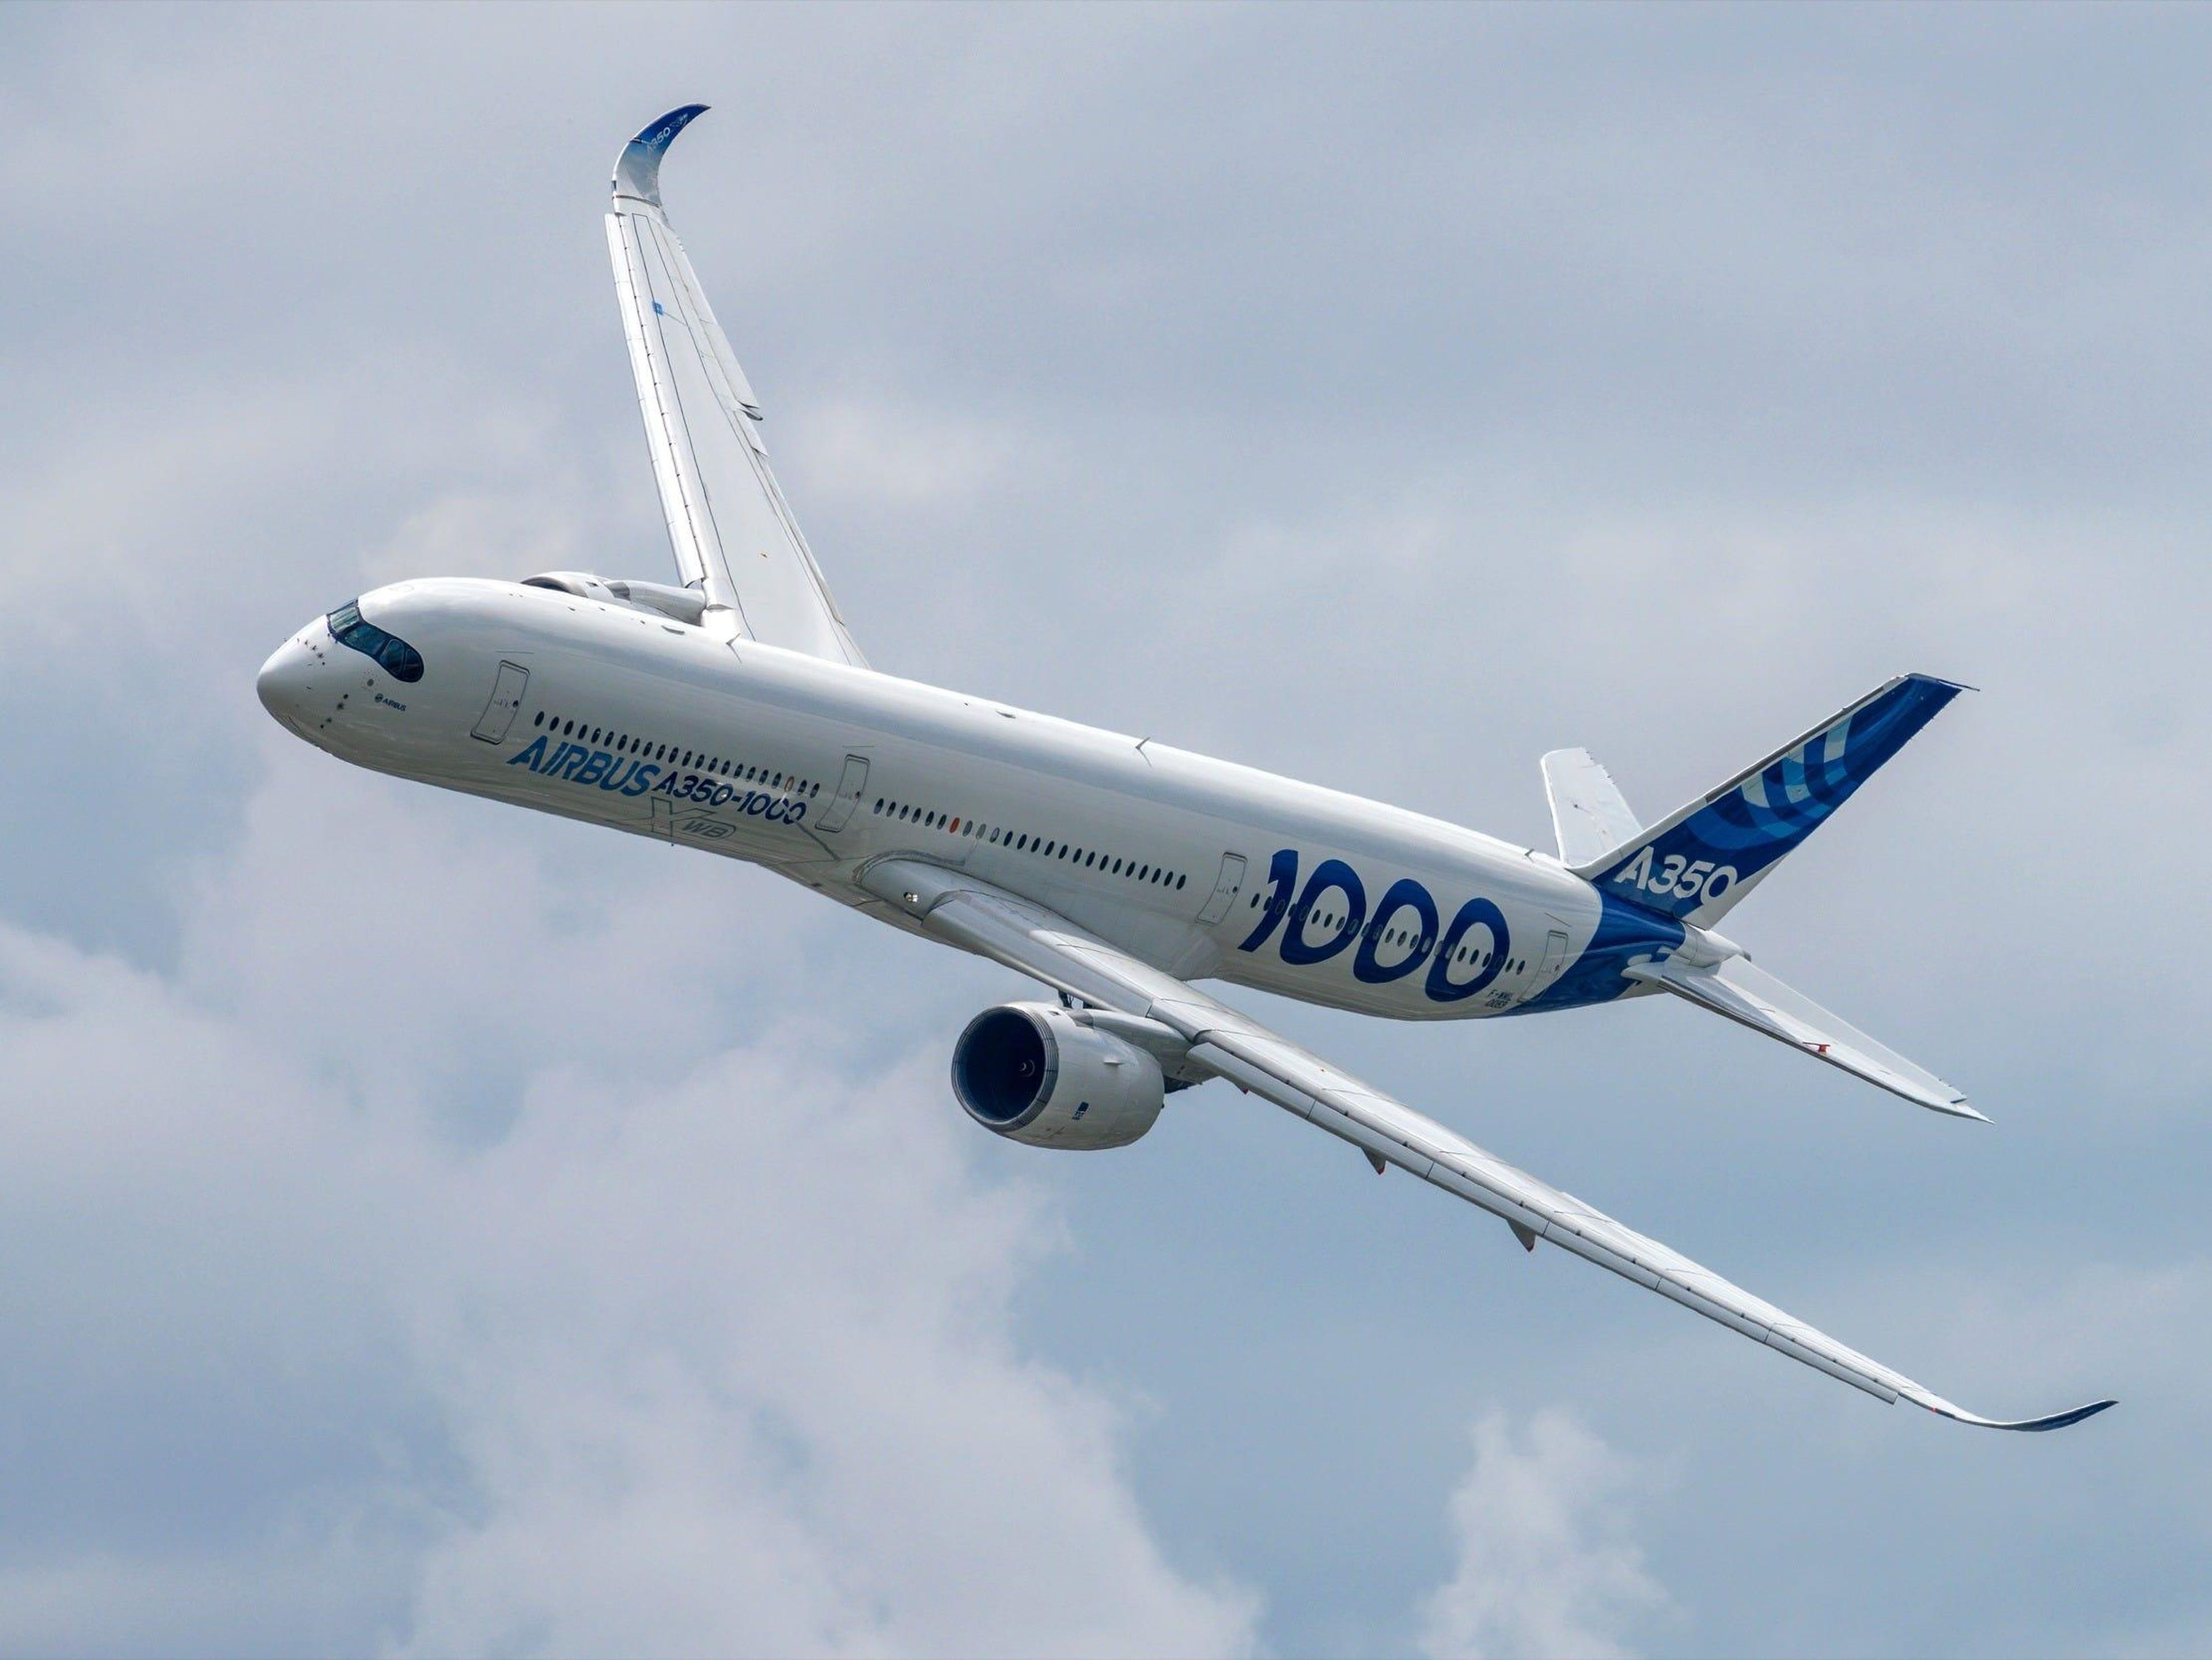 Airbus has been among those leading the charge in autonomous flight, namely with its self-flying A350-1000 XWB, so an autonomous eVTOL isn't far off.